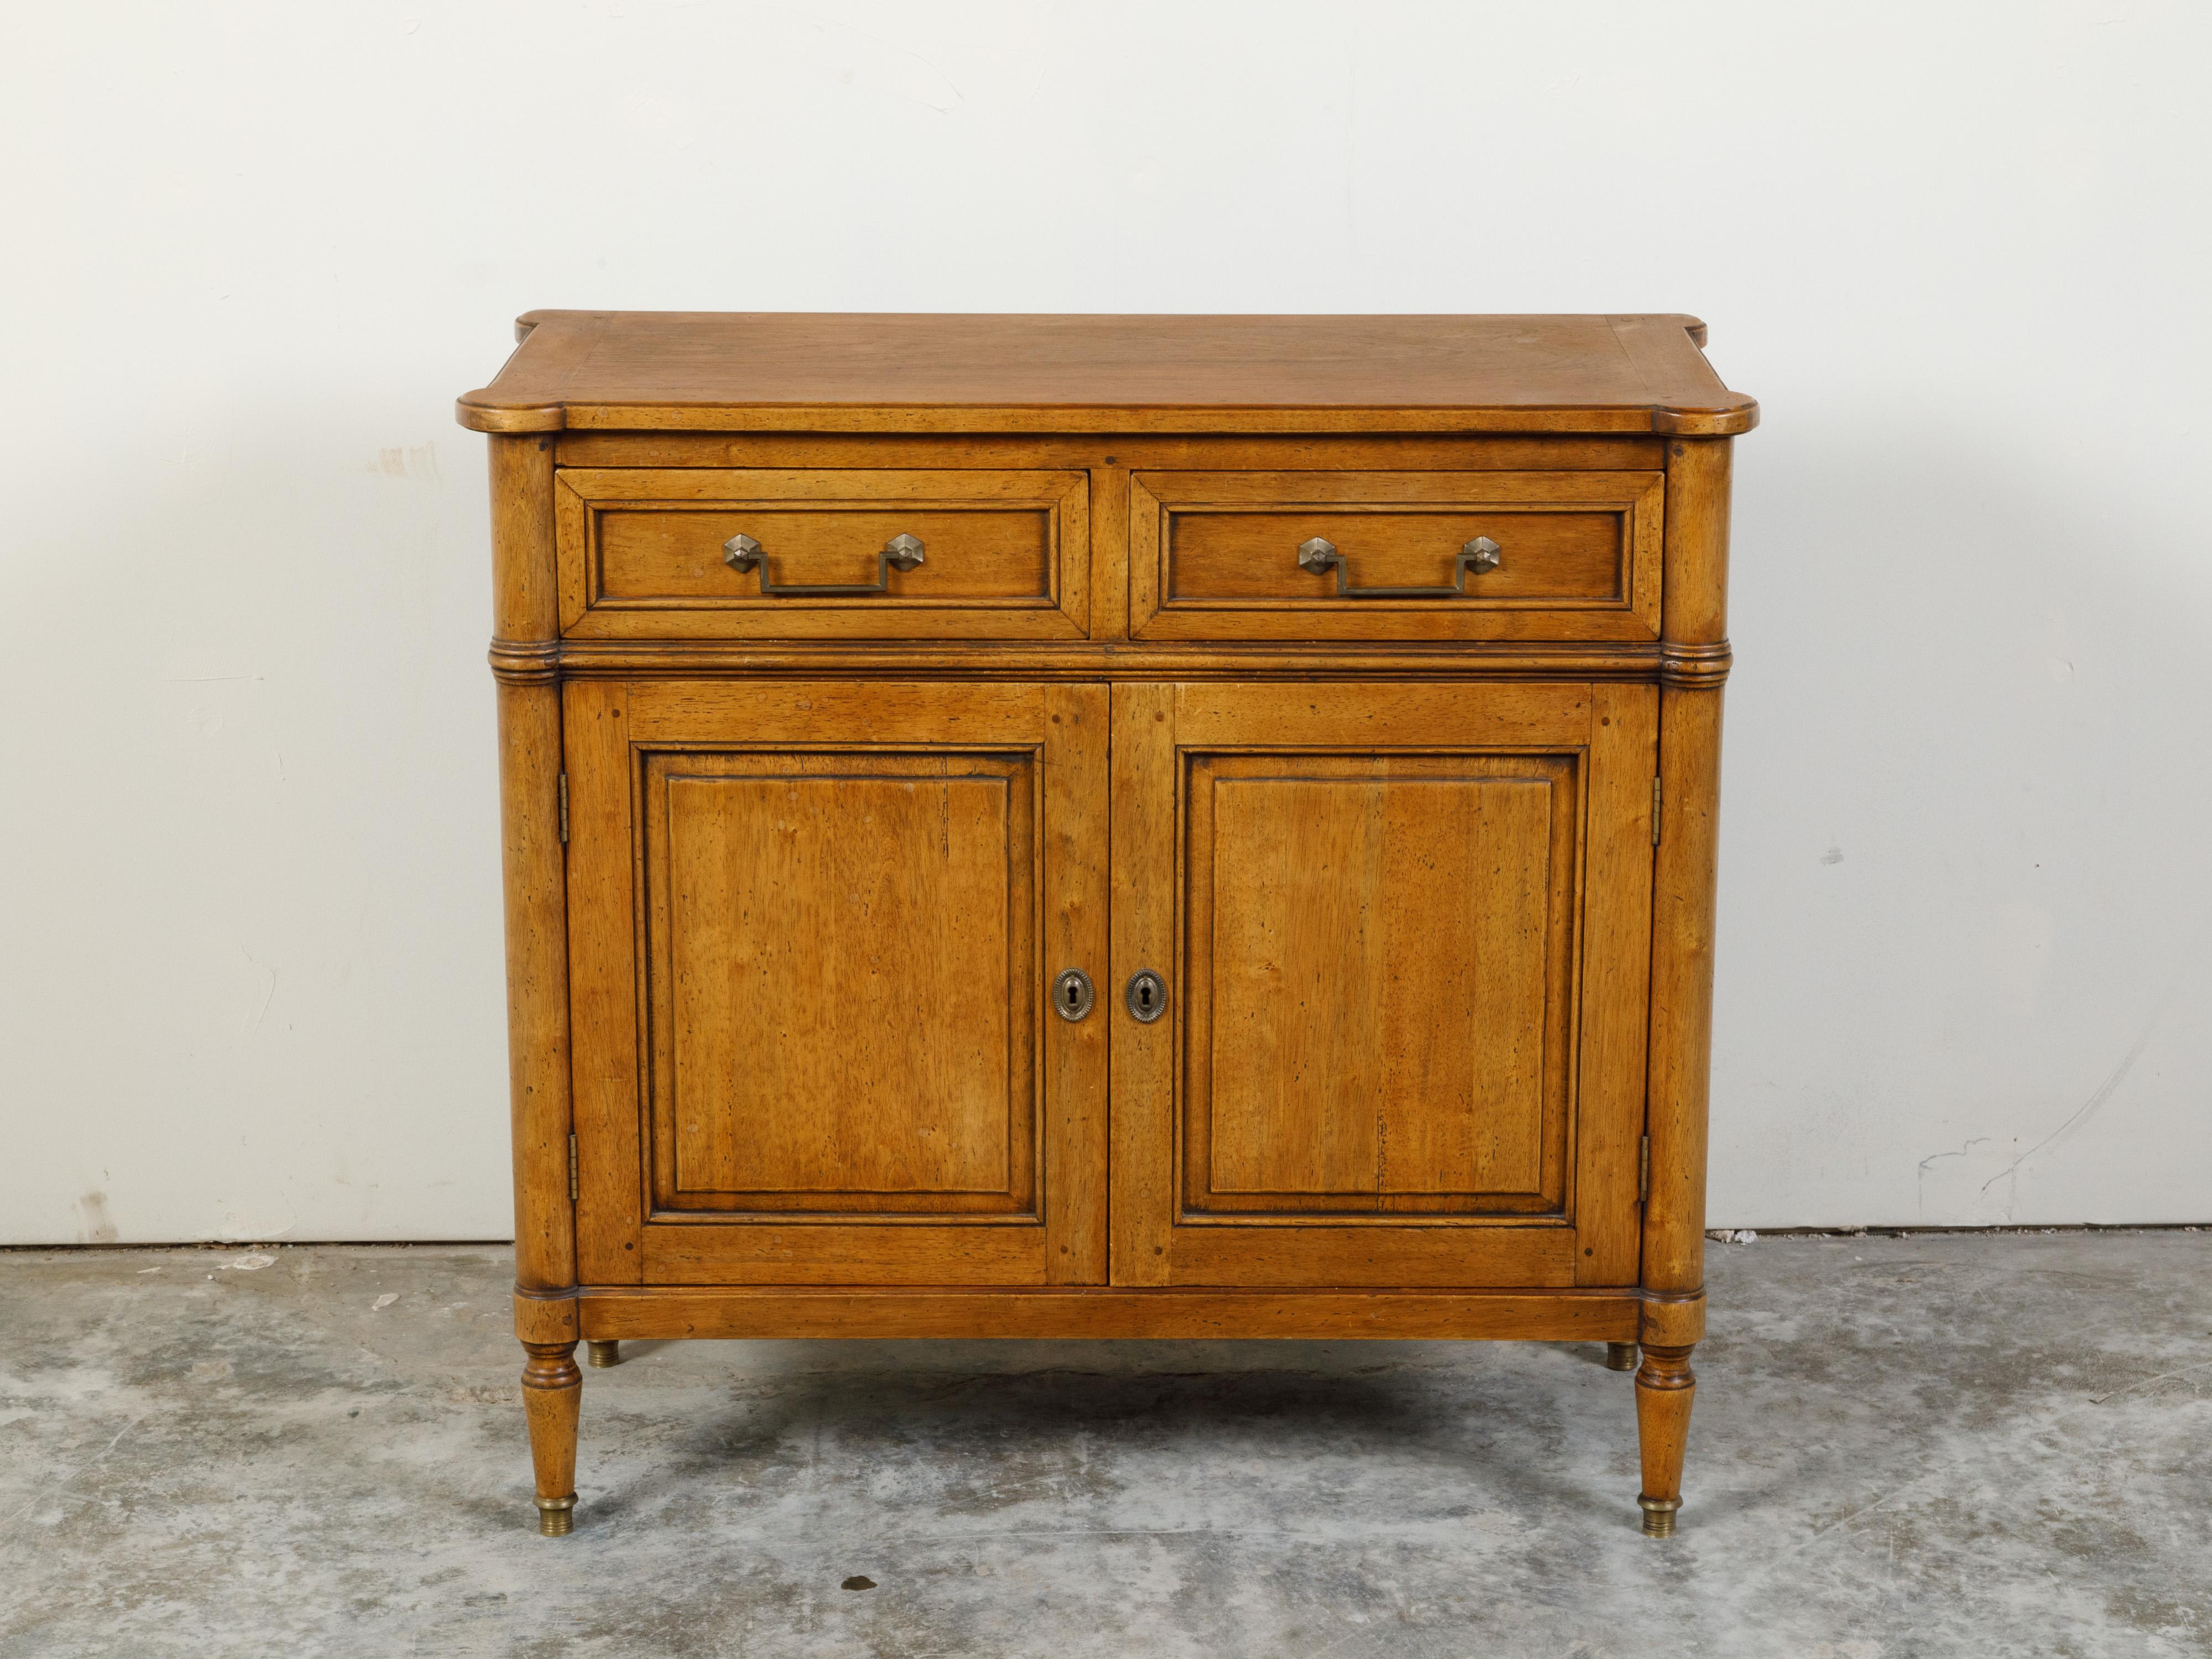 A French walnut buffet from the mid 20th century, with two drawers over two doors and brass hardware. Created in France during the midcentury period, this walnut buffet features a rectangular top with rounded corners, sitting above two drawers with